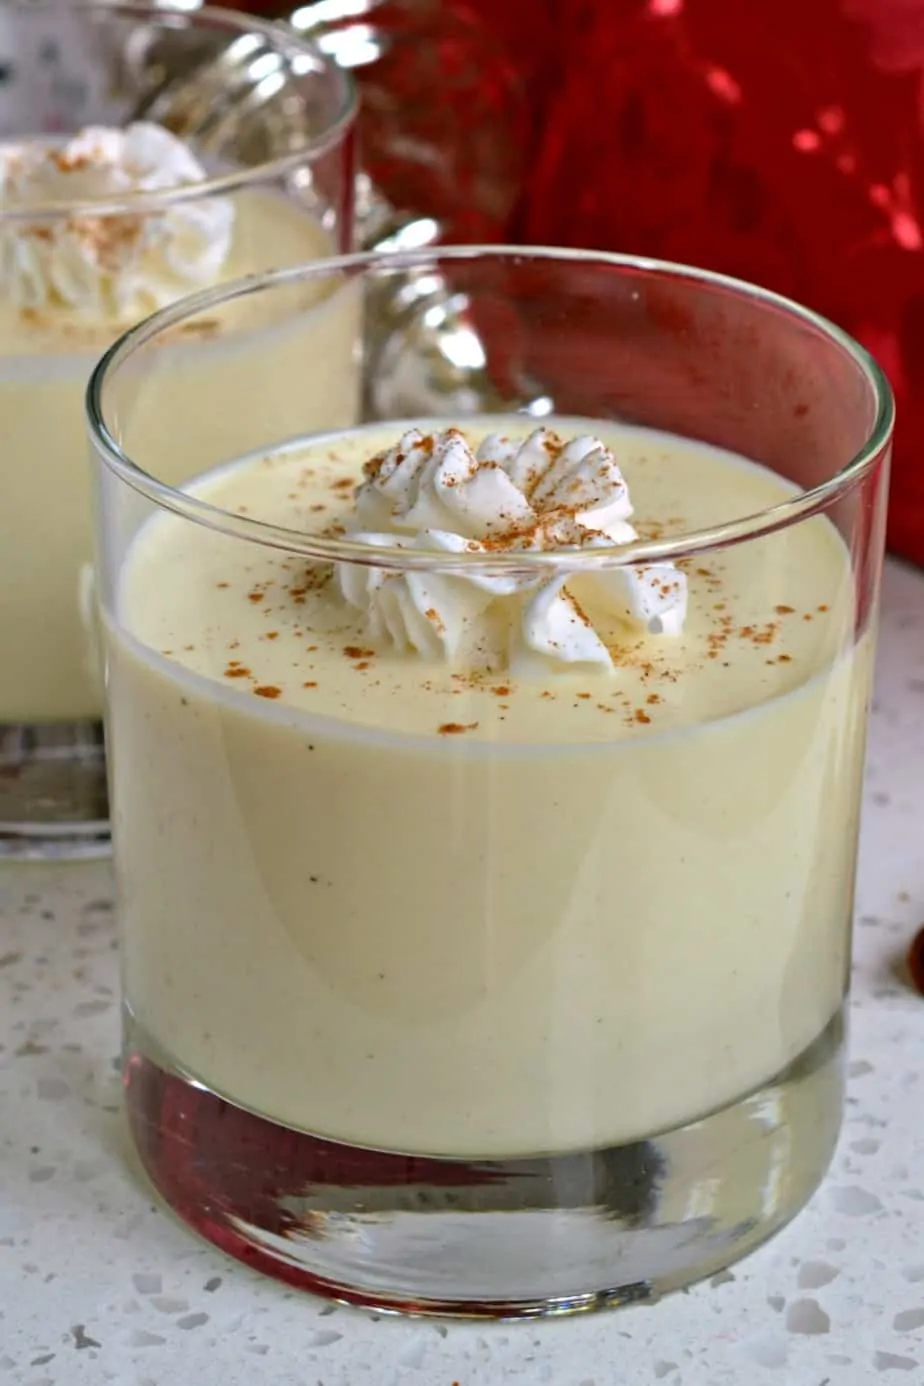 A creamy easy to make homemade eggnog recipe with nutmeg, cinnamon and a pinch of ground cloves.